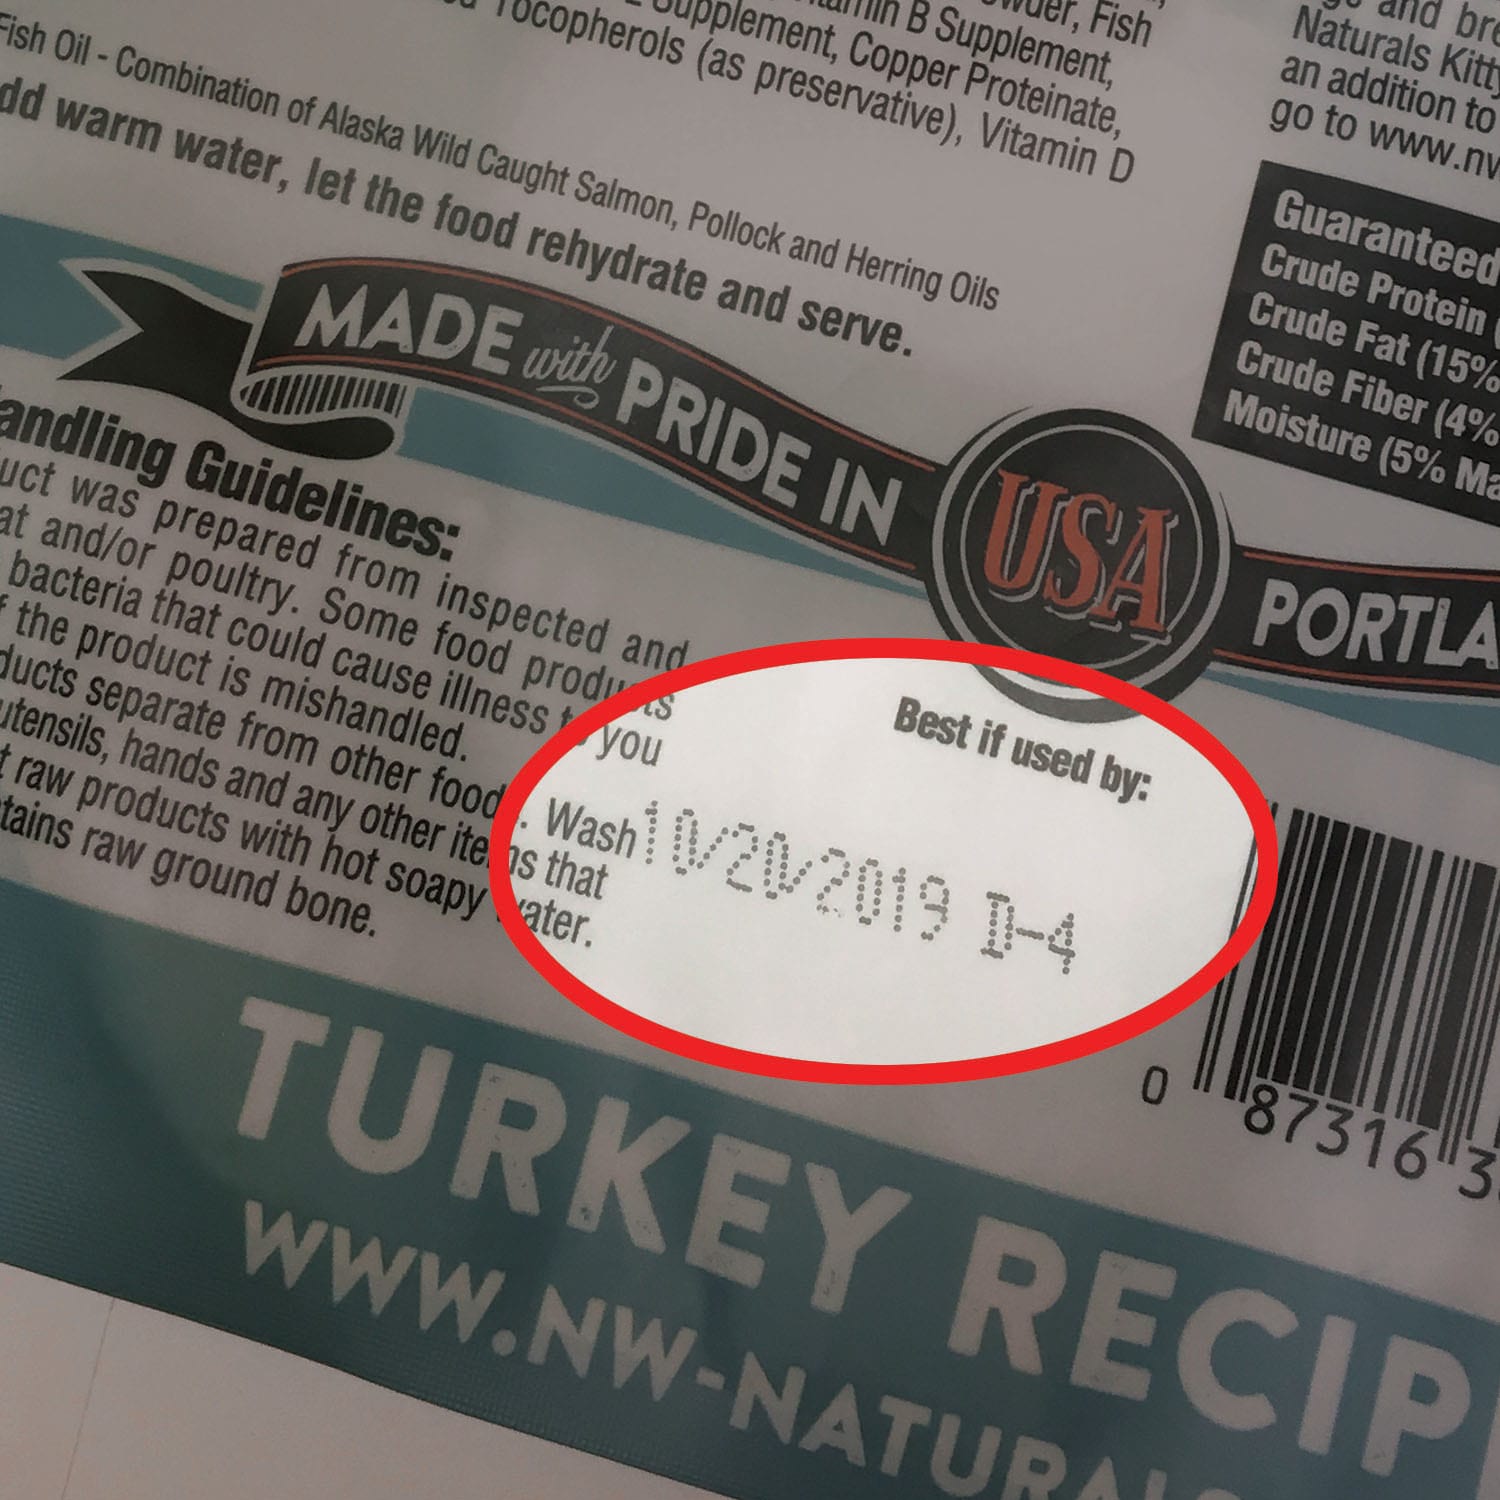 Turkey Recipe "best if used by" location